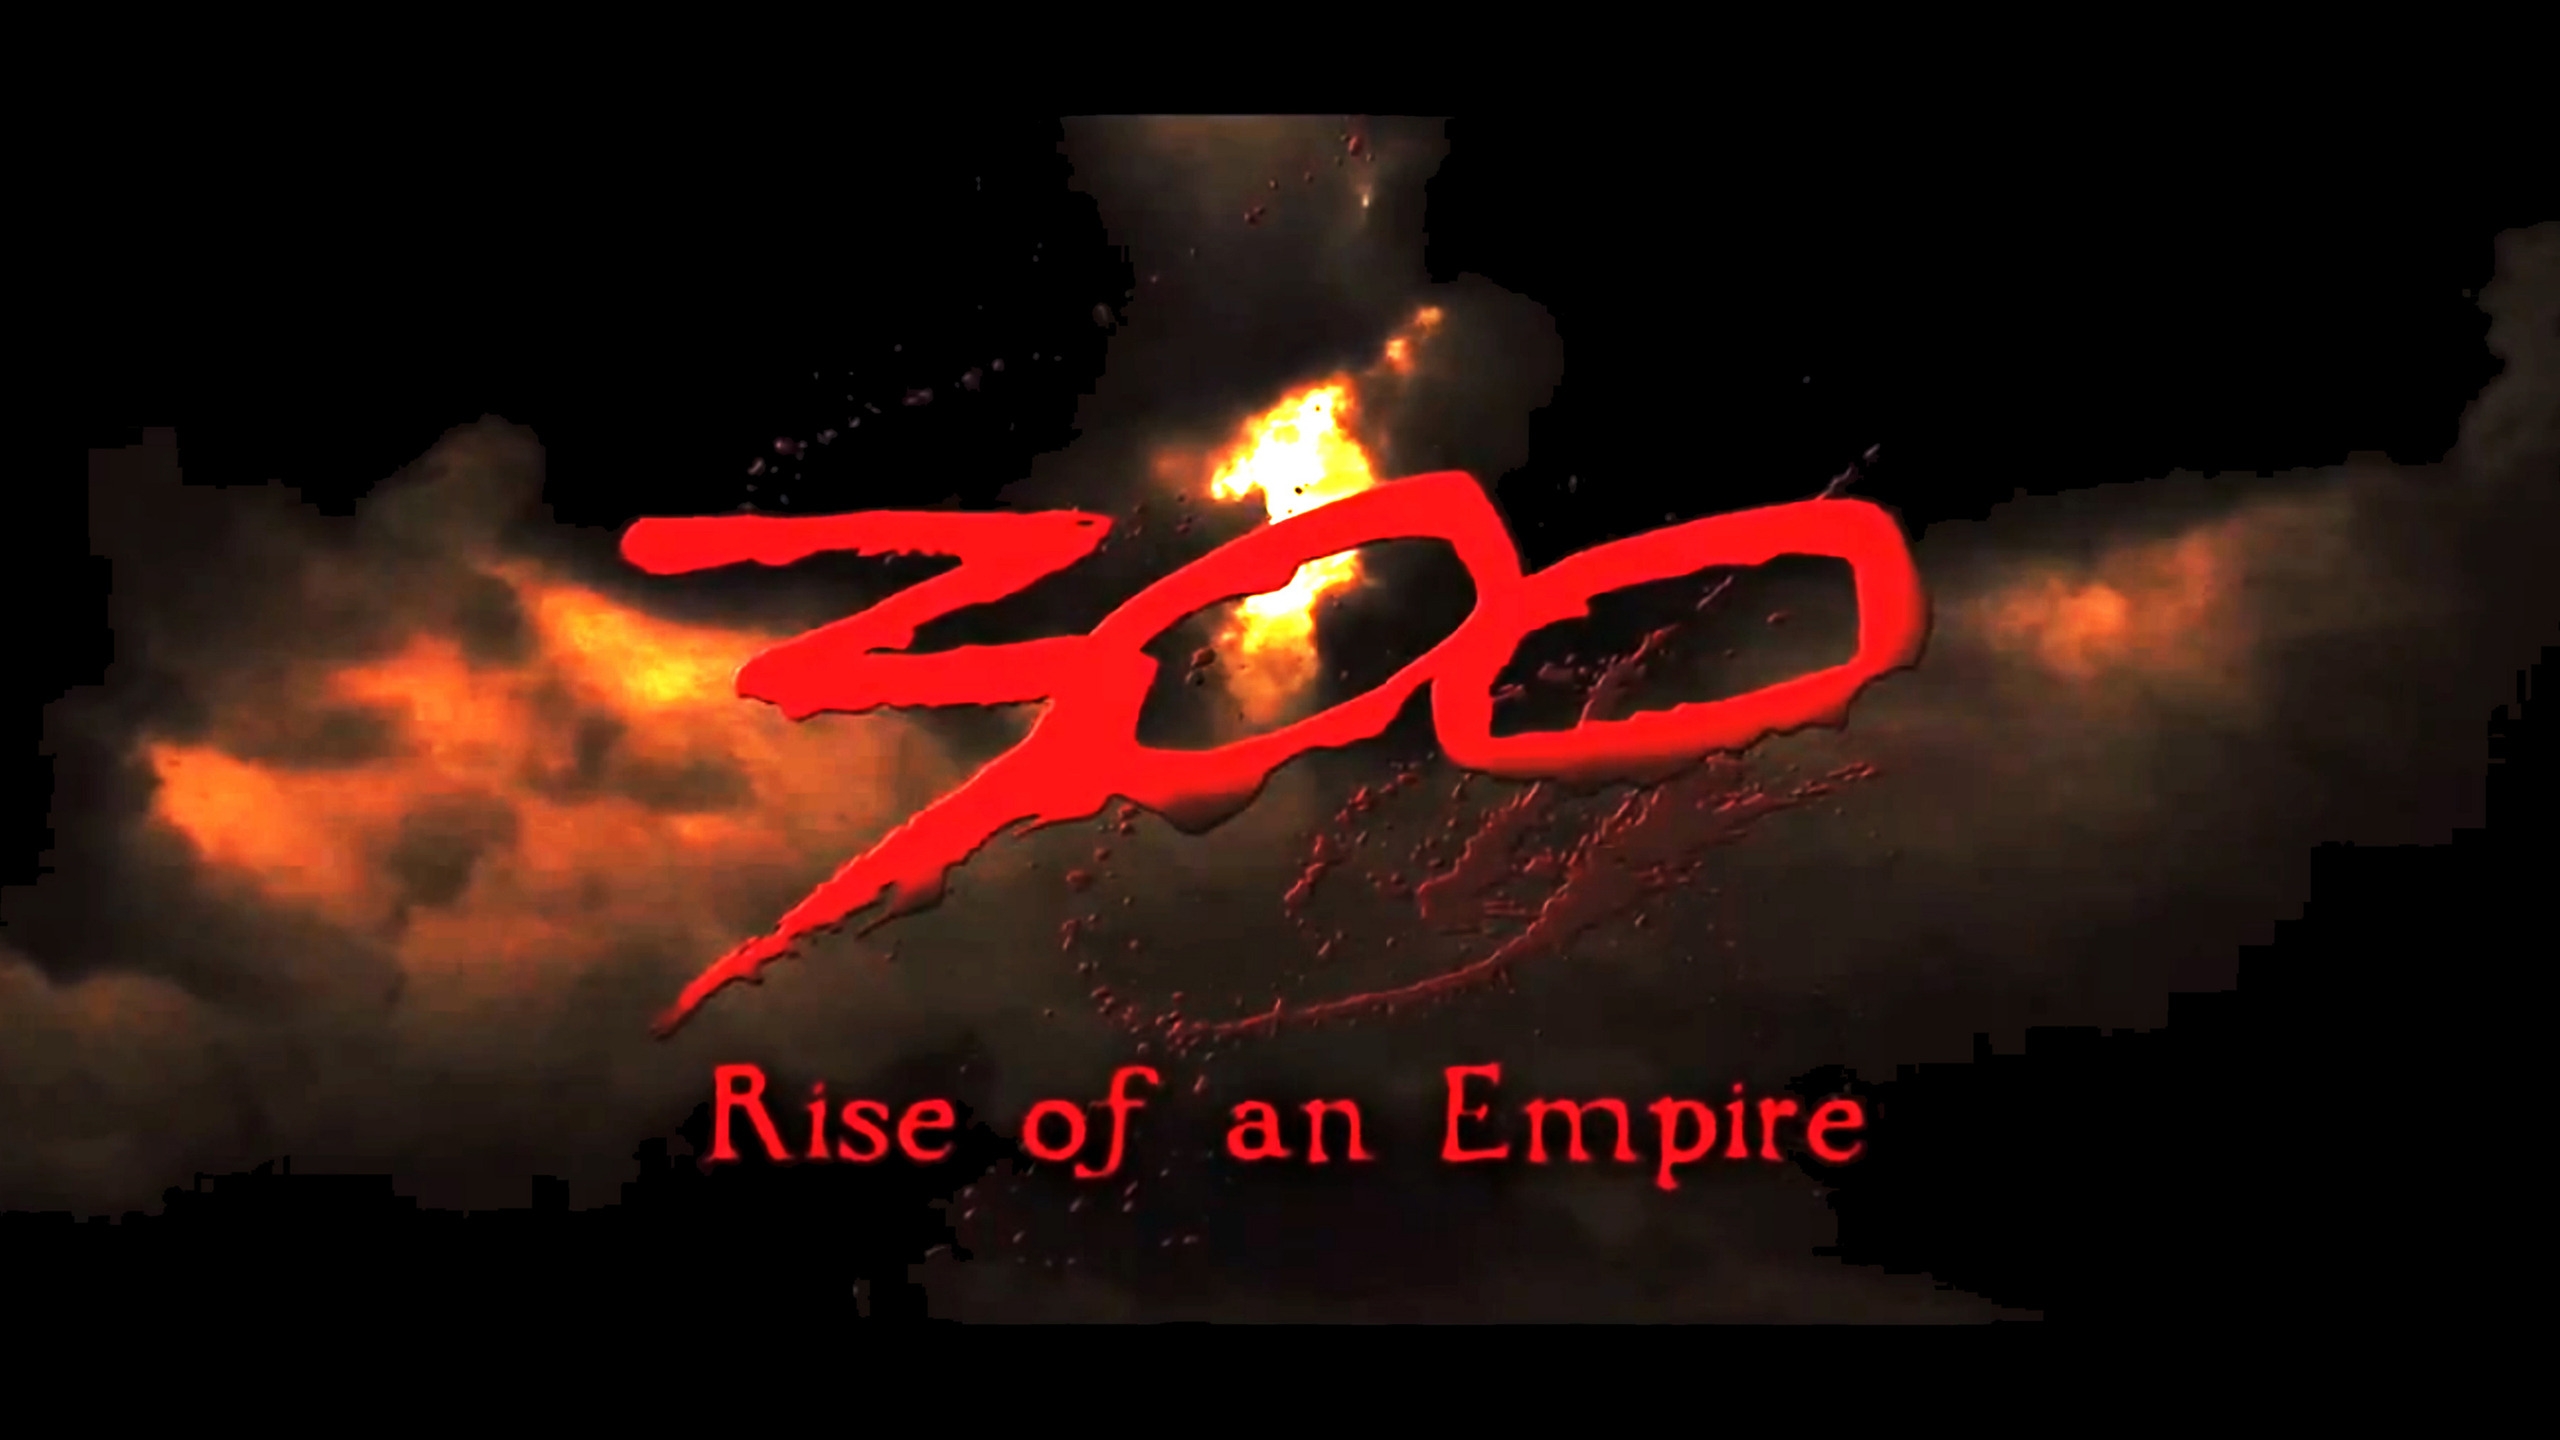 300 Rise of an Empire 2014 for 2560x1440 HDTV resolution